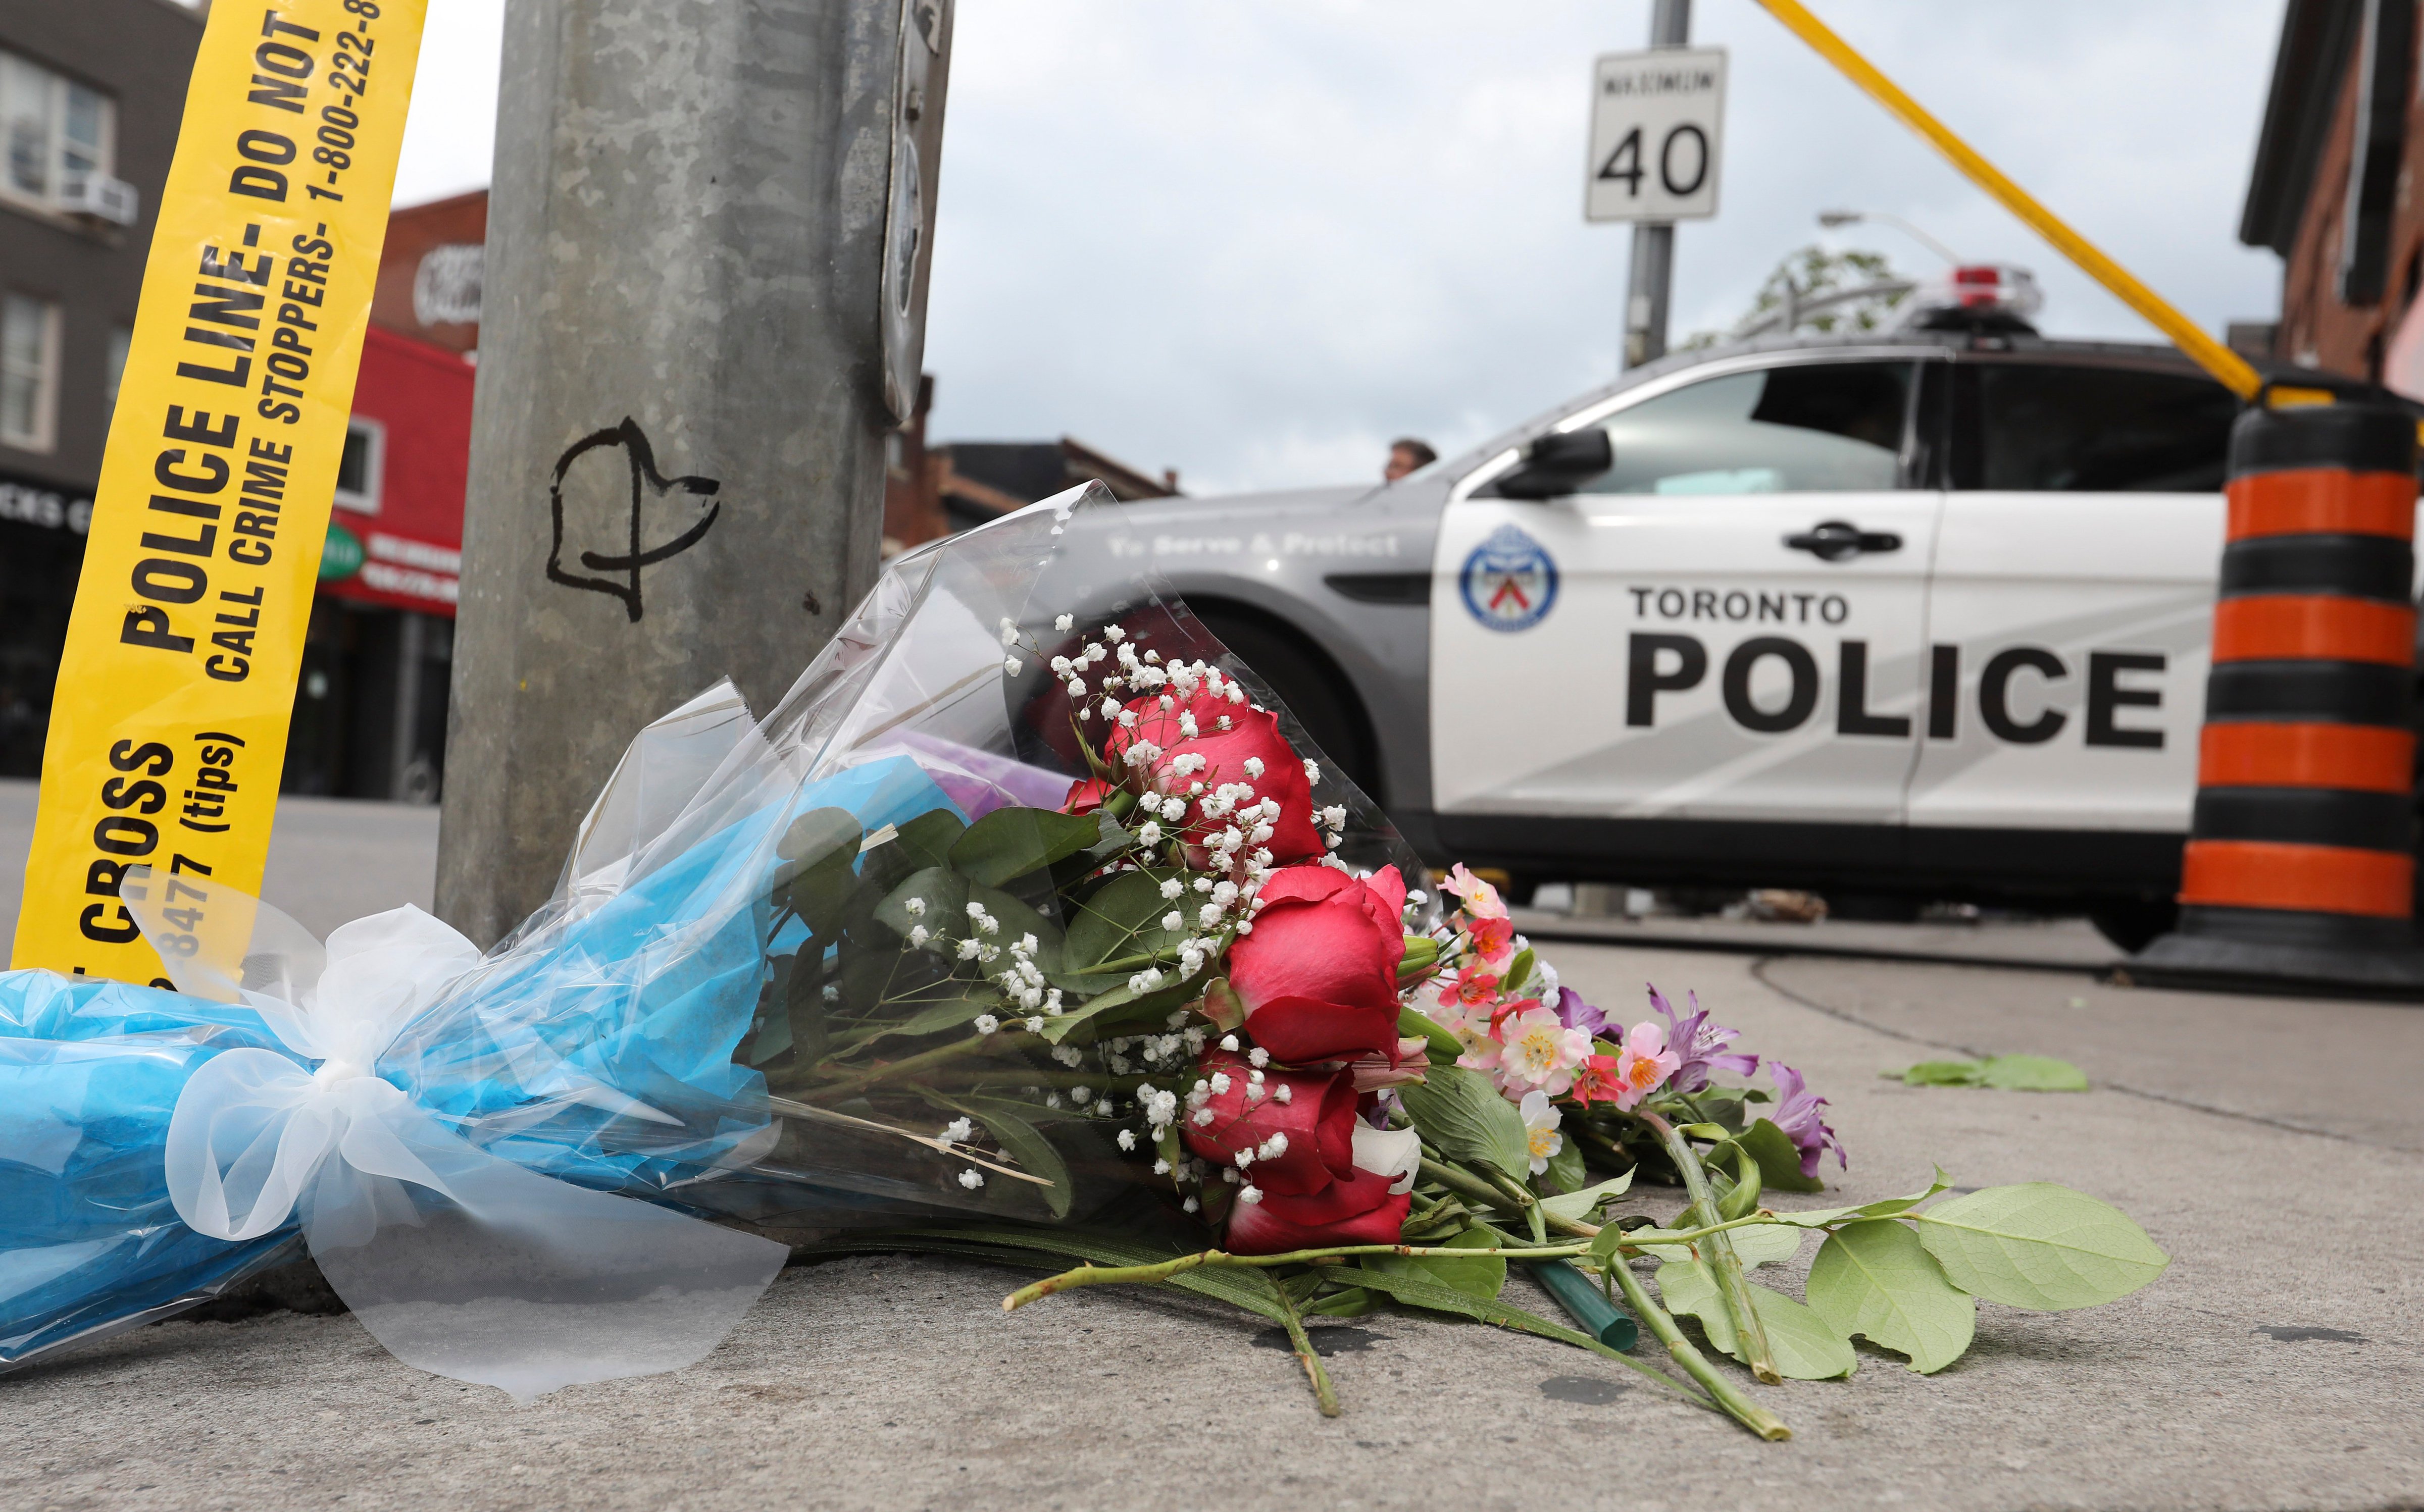 A makeshift memorial commemorates a mass shooting that killed two on Danforth Avenue in Toronto, Ontario on July 22, 2018. (Richard Lautens&mdash;Toronto Star/Getty Images)